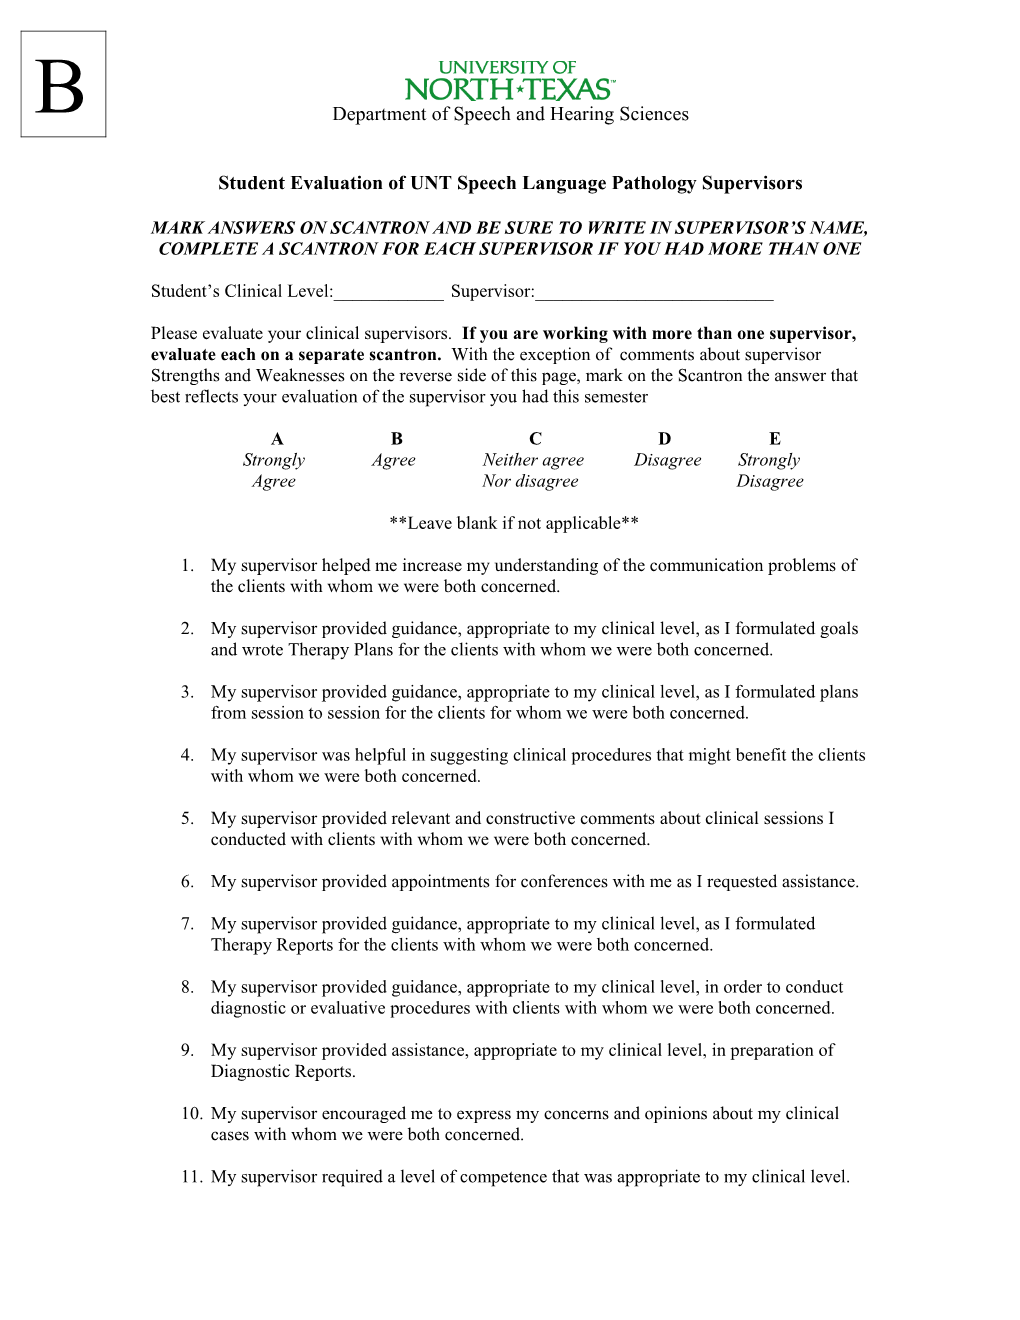 Student Evaluation of UNT Clinical Supervisors